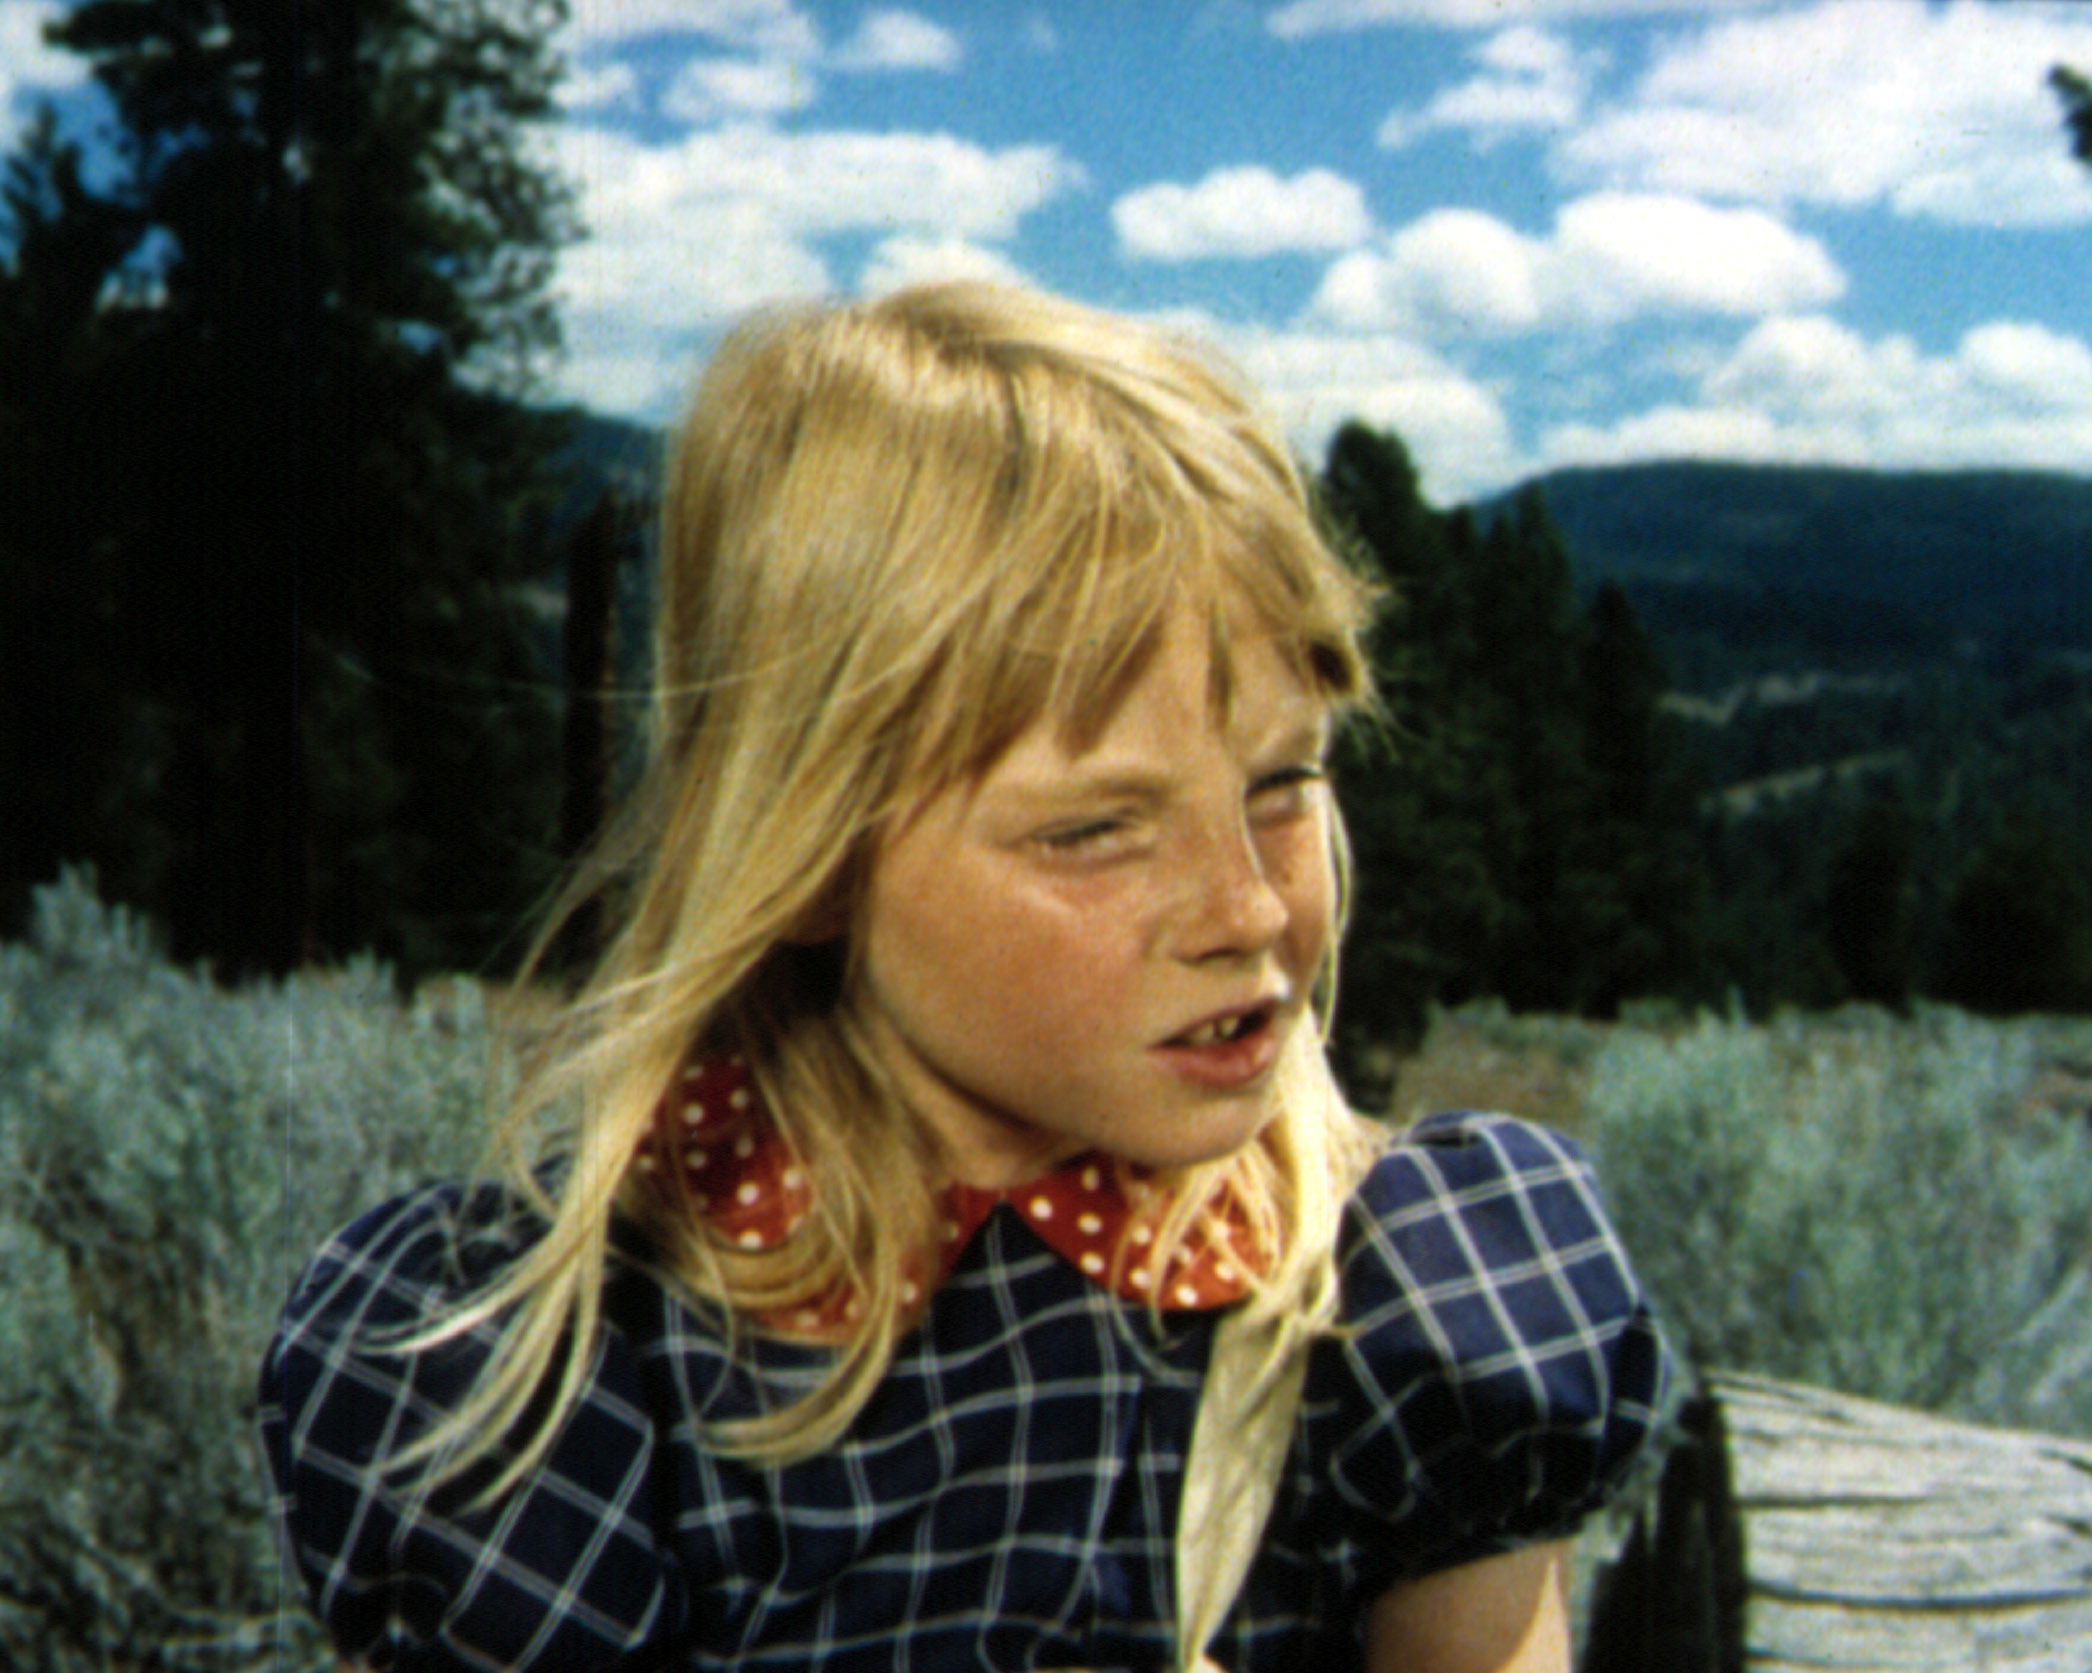 YoungJodie in braids and a checkered dress with a polka-dot scarf outdoors in a scene from &quot;Napoleon and Samantha&quot;